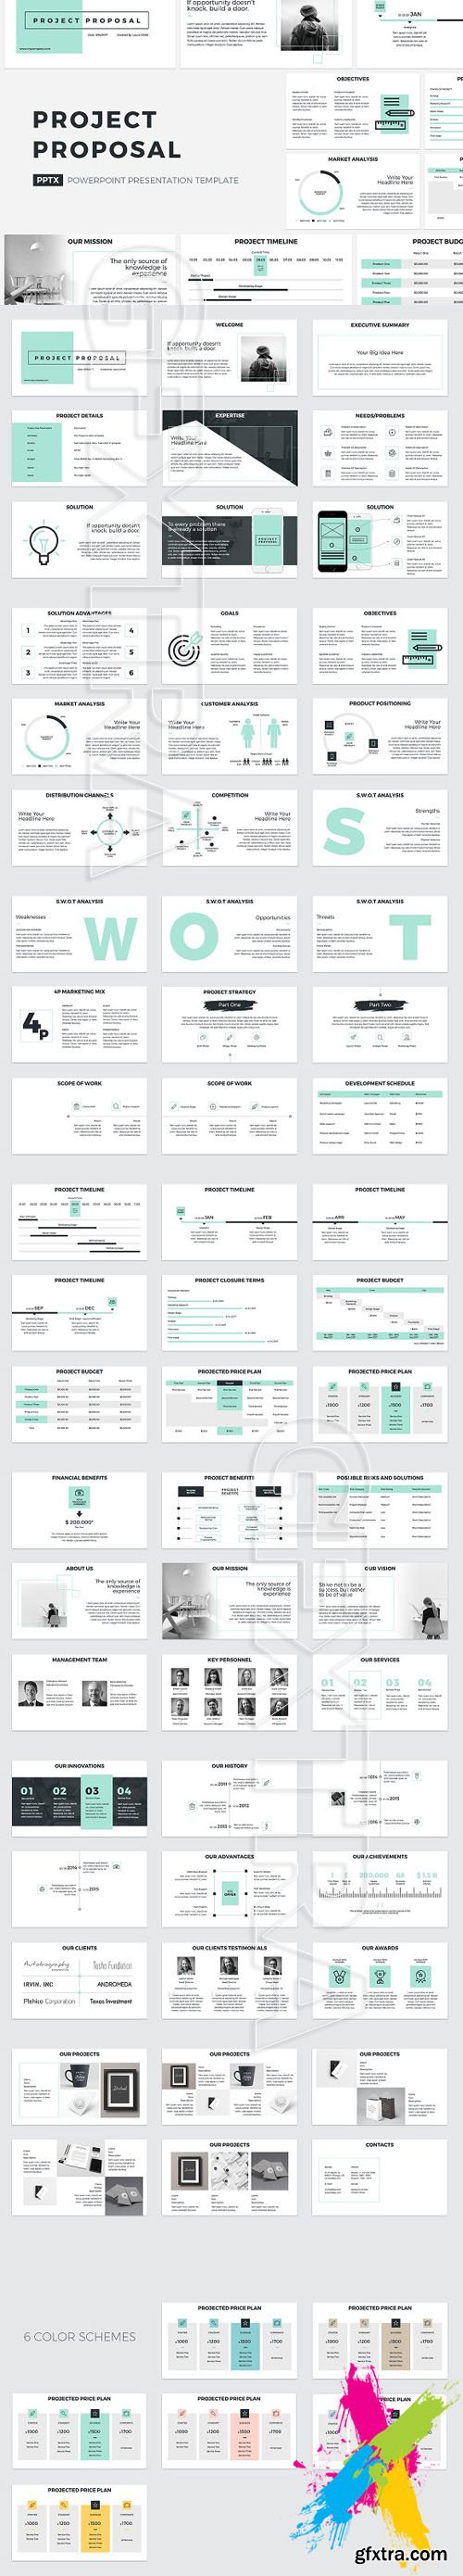 CM - Project Proposal PowerPoint Template 1614898